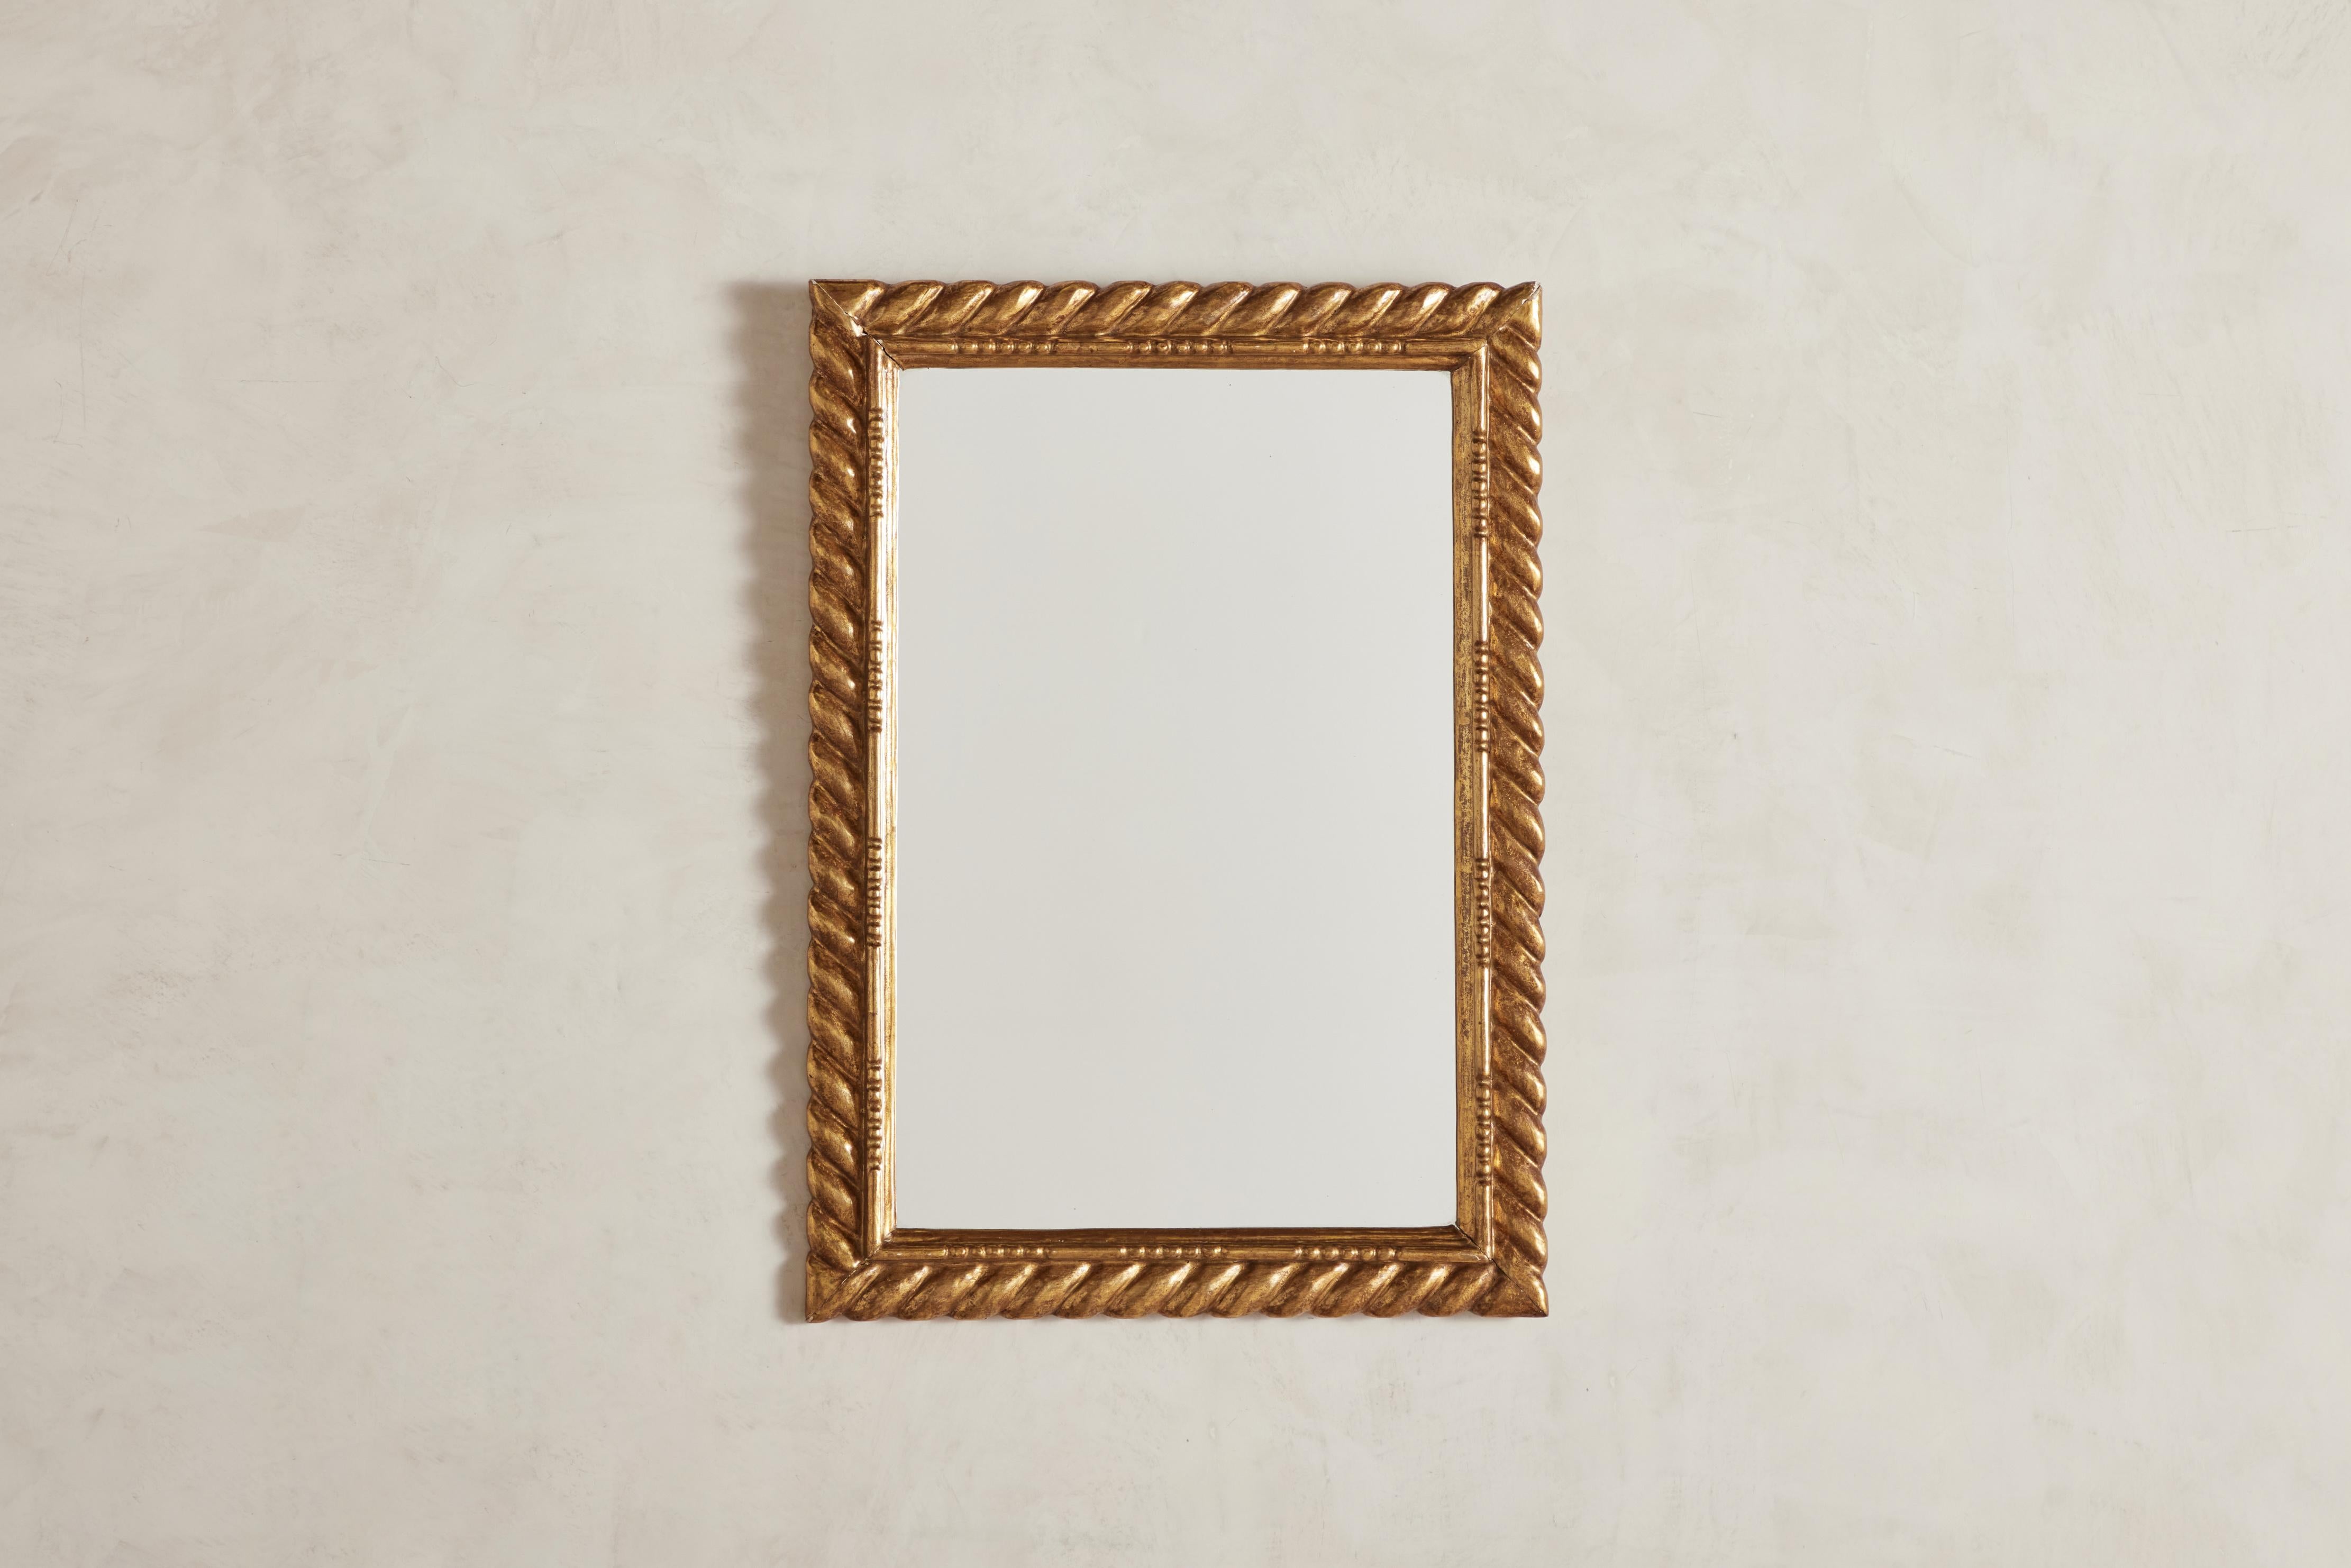 Ornate gold leaf Colonial Revival wall mirror from Mexico circa 1960.